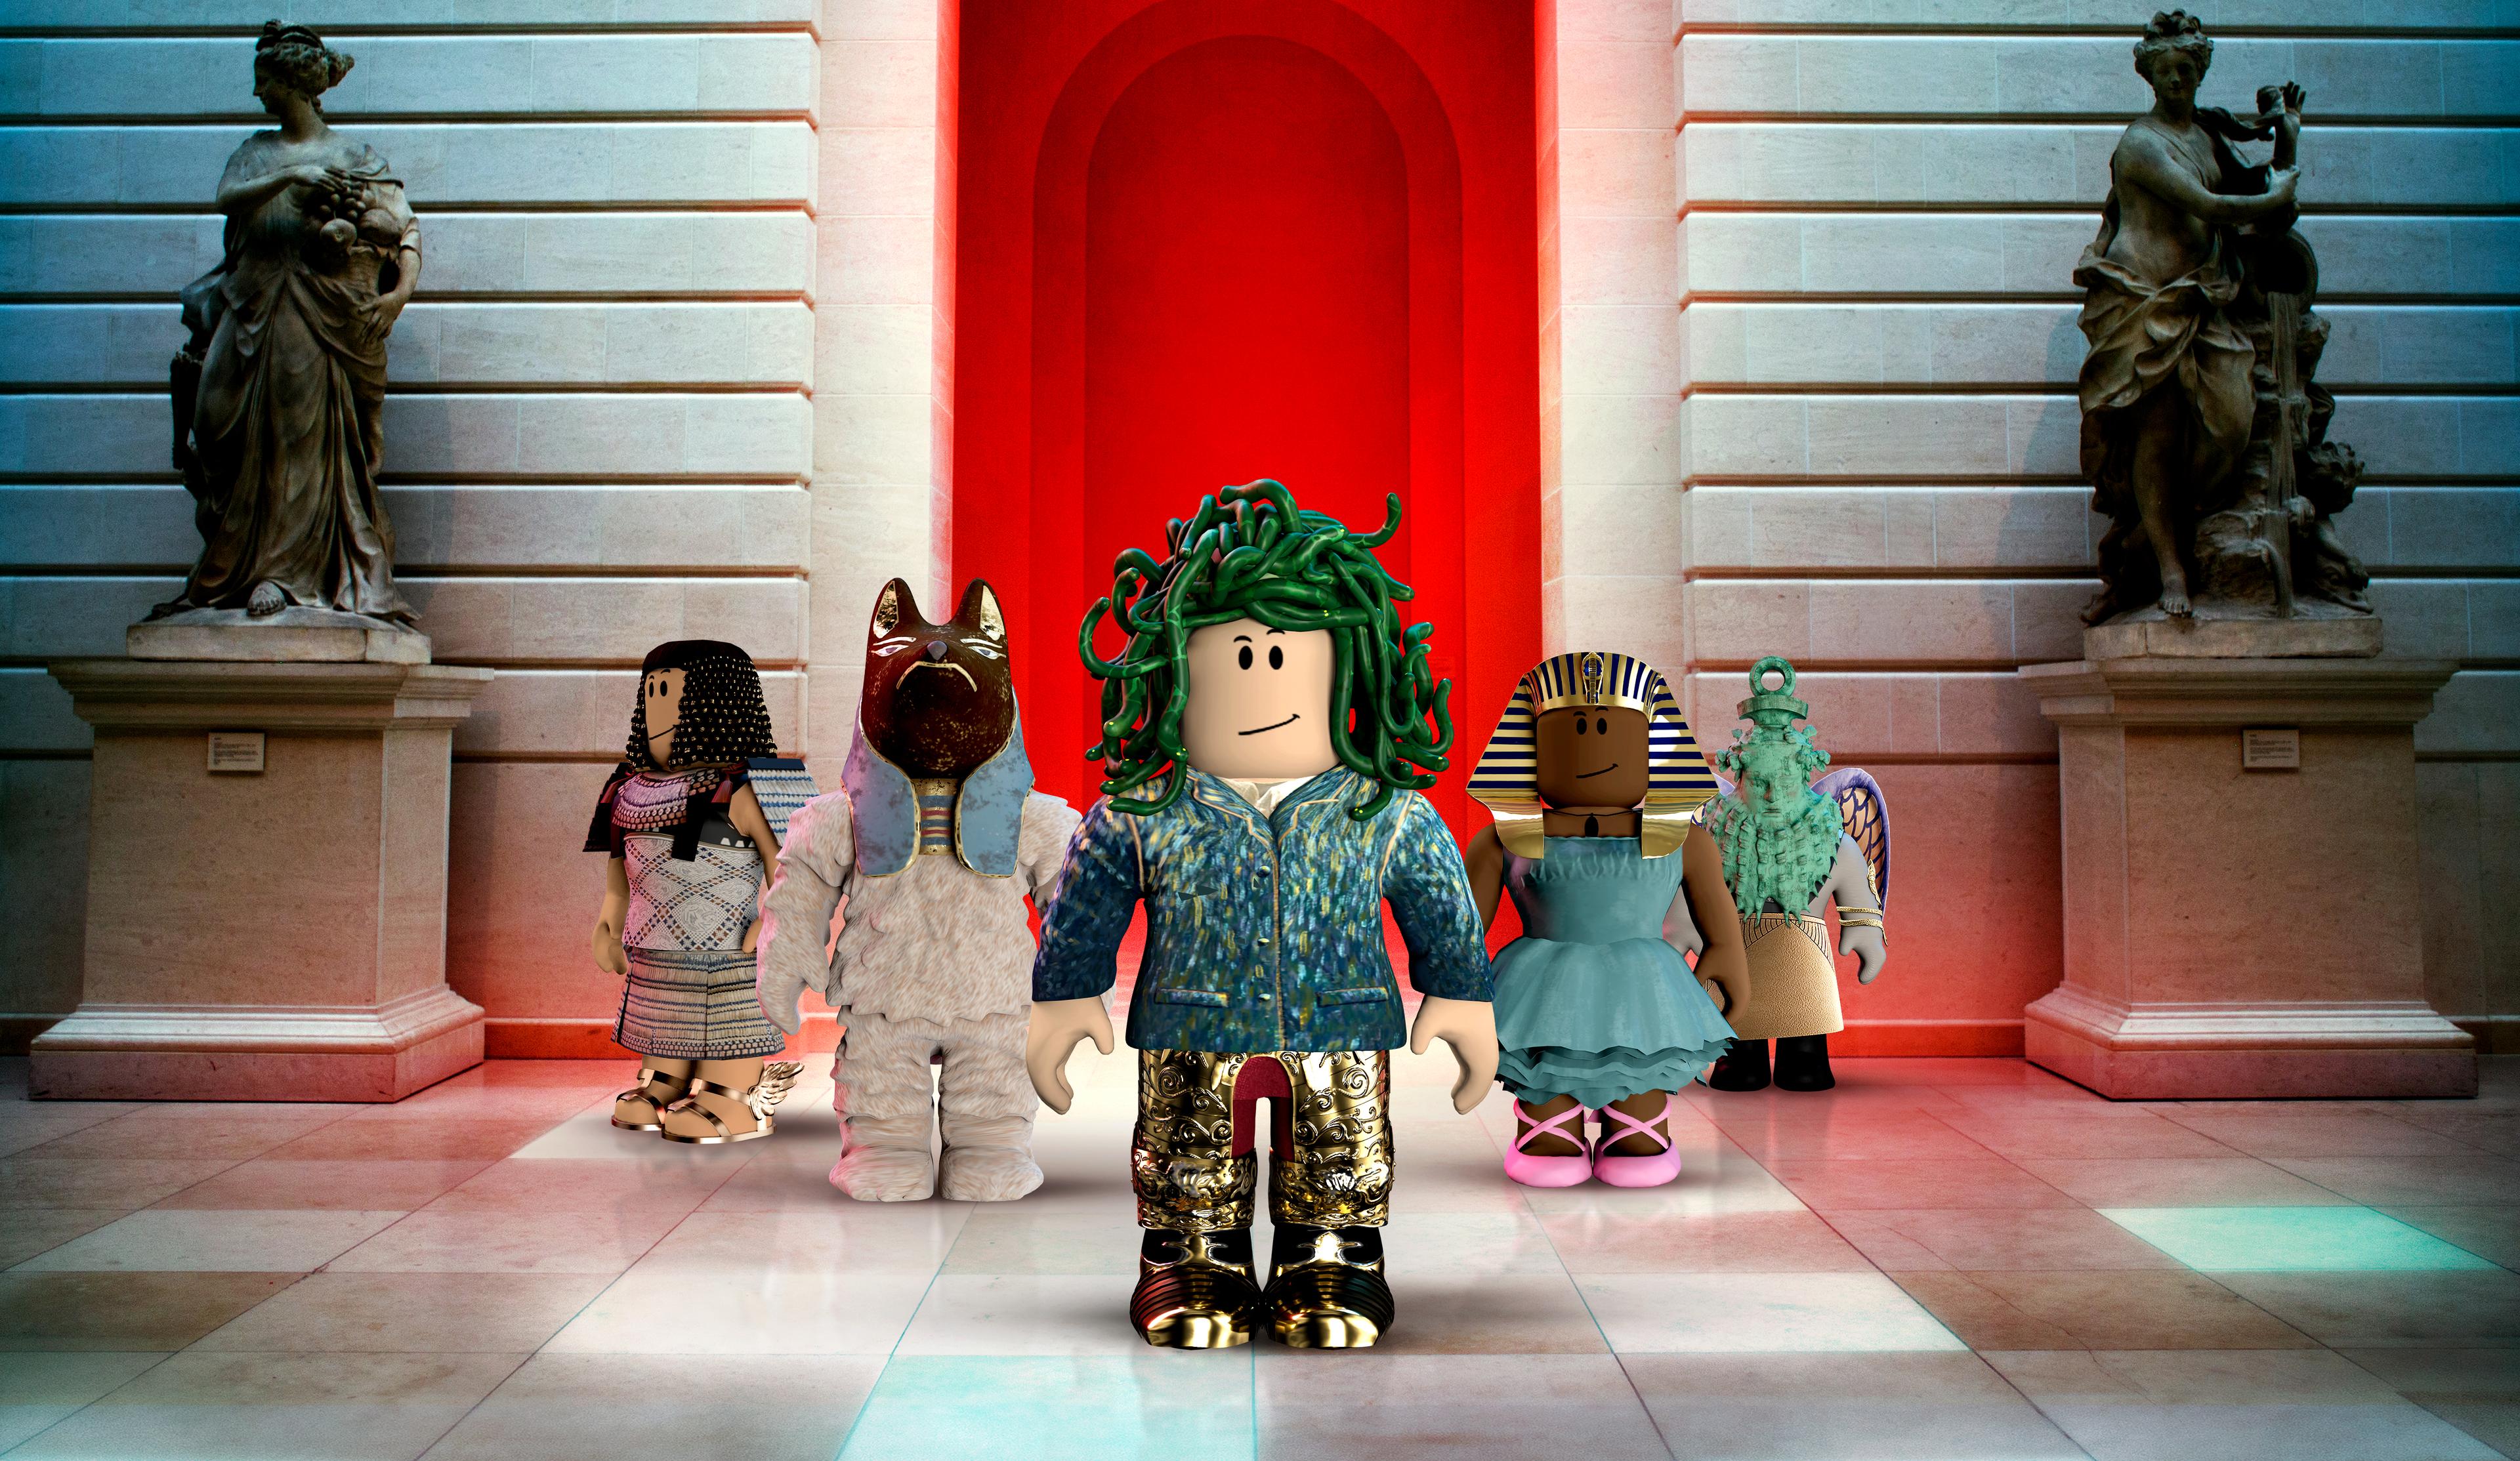 five roblox characters sporting Met-themed accessories pose inside a digitally recreated Met gallery.